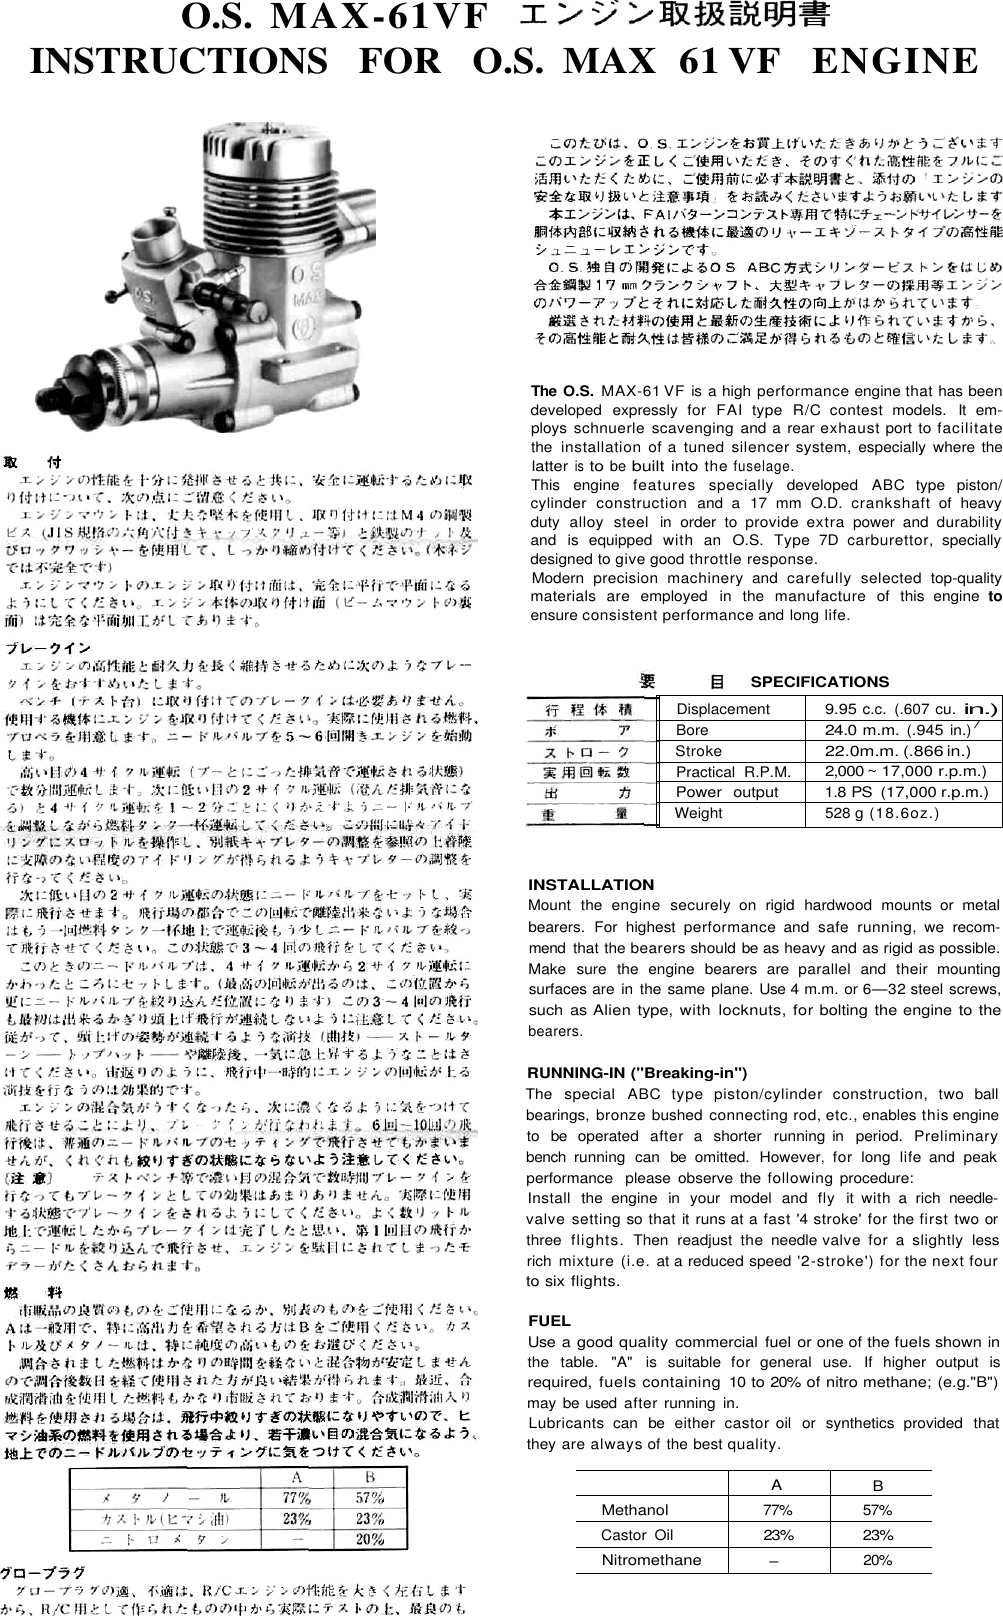 Page 1 of 2 - 61vf-manual